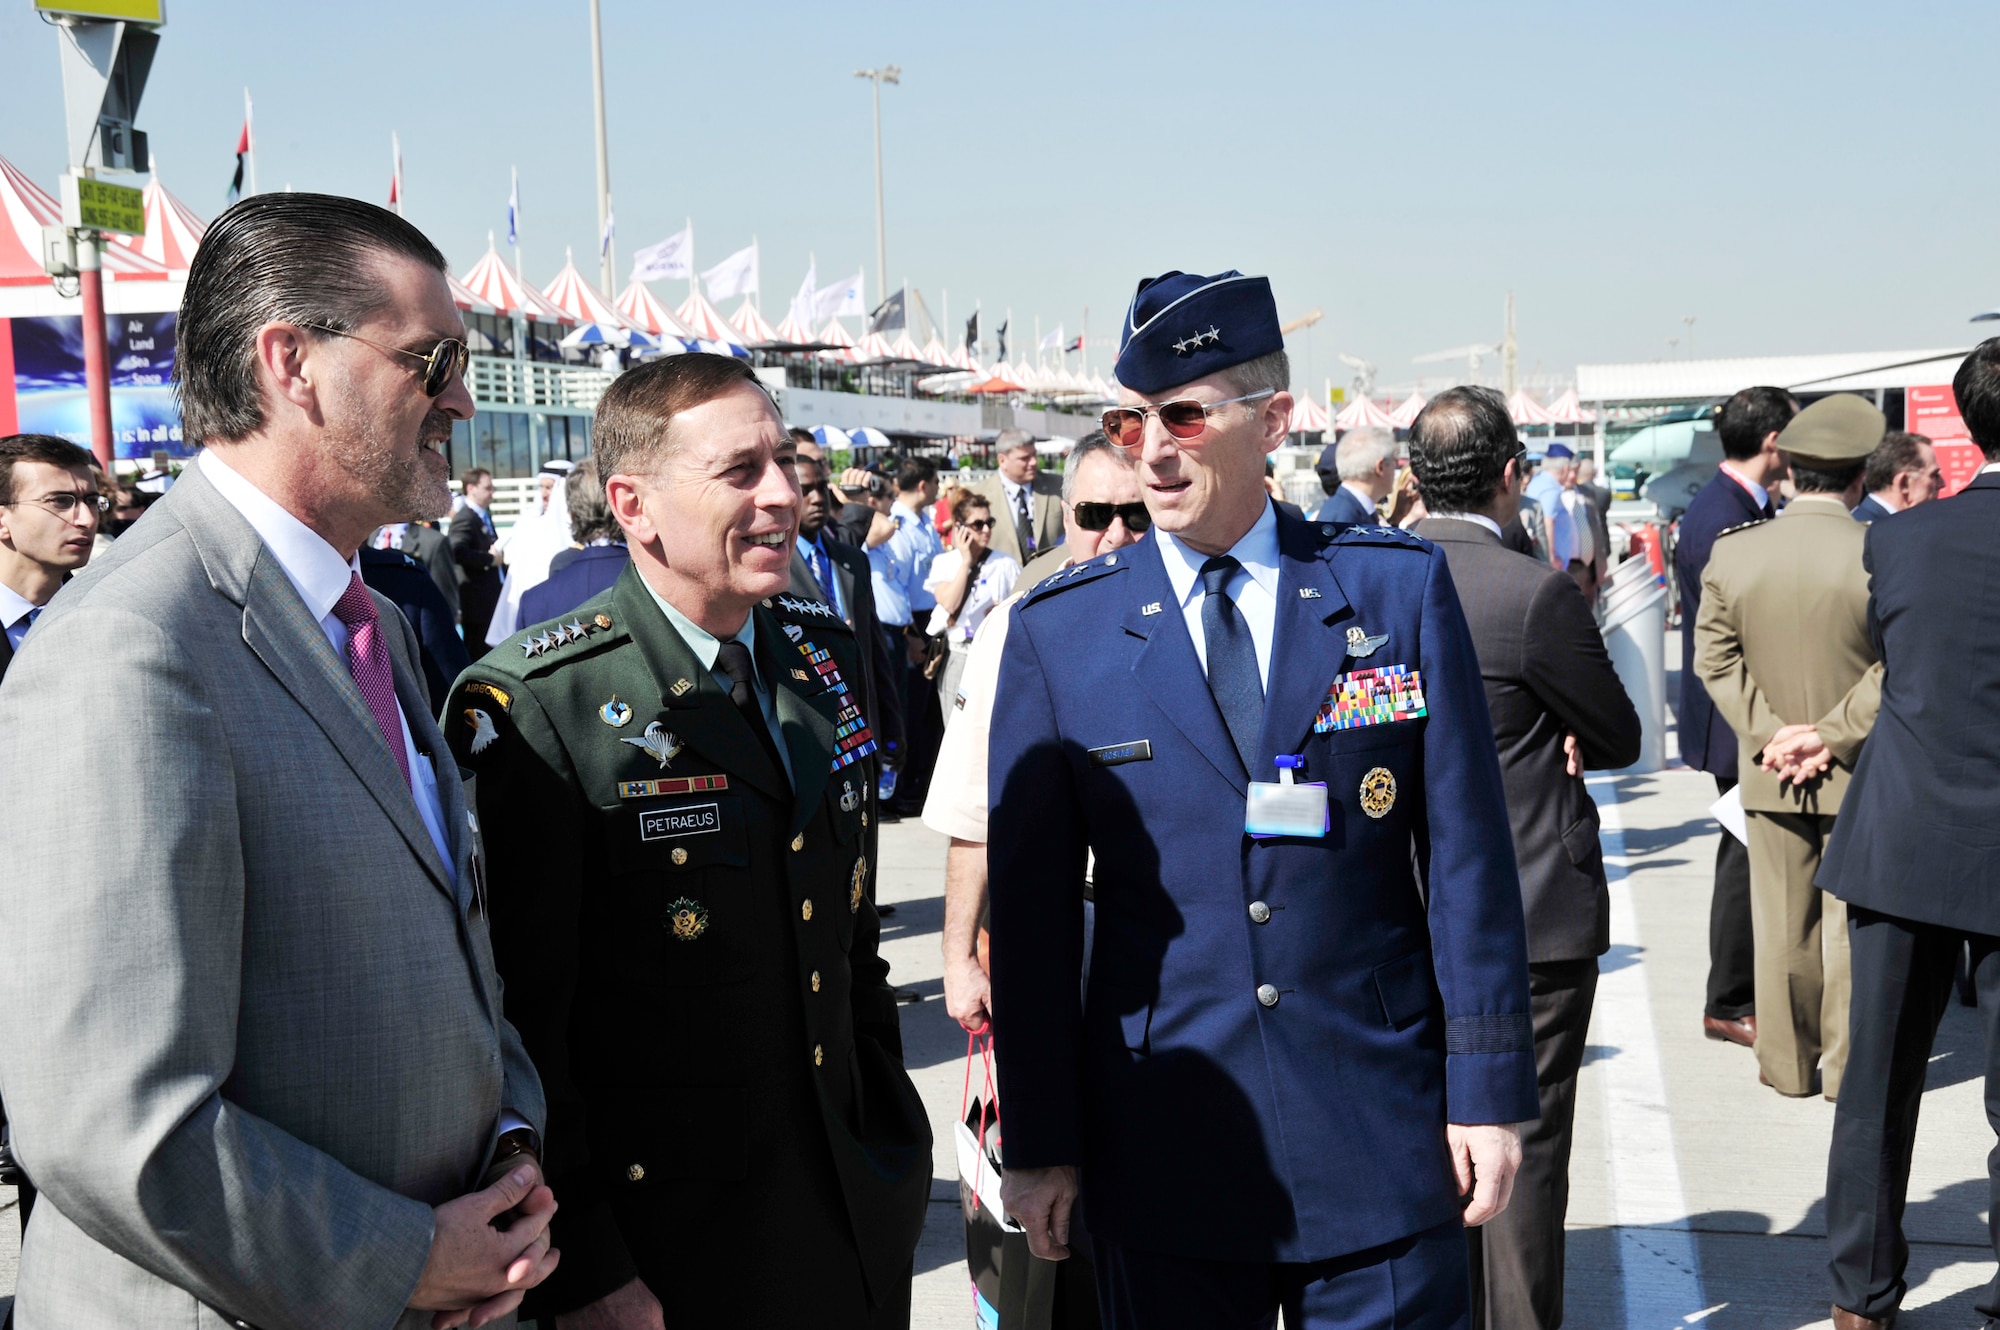 Richard Olsen, the U.S. Ambassador to the United Arab Emirates, Army Gen. David Petraeus, the U.S. Central Command commander and Lt. Gen. Mike Hostage, the U.S. Air Forces Central Command commander, stop to talk Nov. 15, 2009 at the Dubai Air Show in the United Arab Emirates. (U.S. Air Force photo/Tech. Sgt. Charles Larkin Sr.)